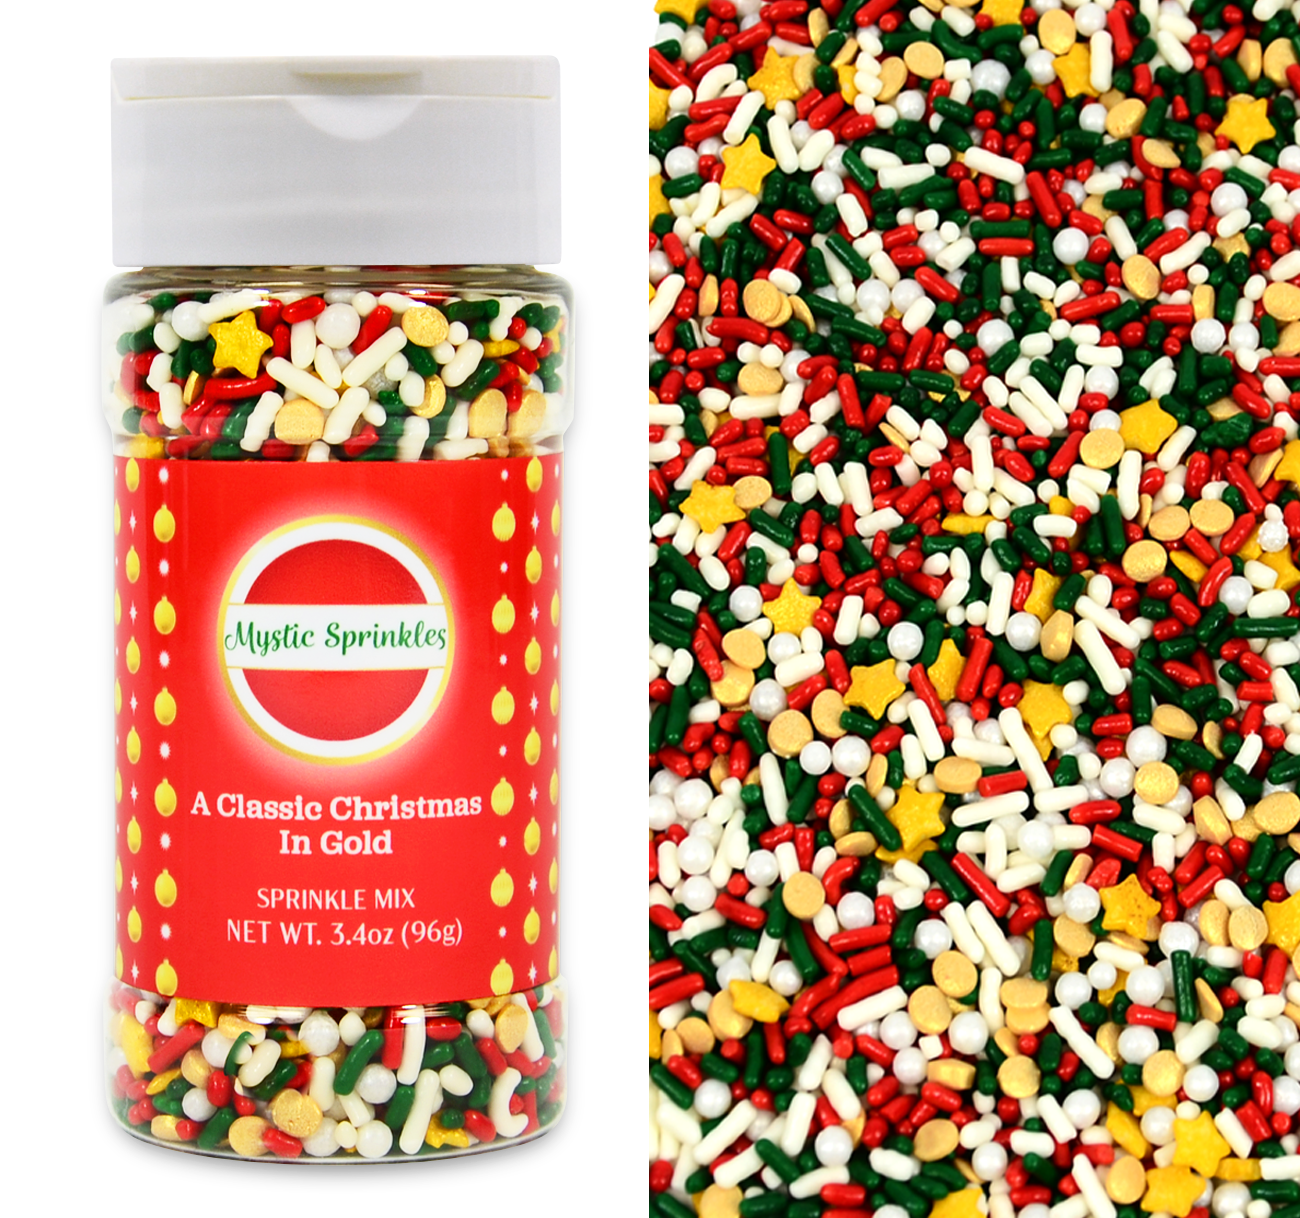 A Classic Christmas in Gold Sprinkle Mix 3.4oz Bottle